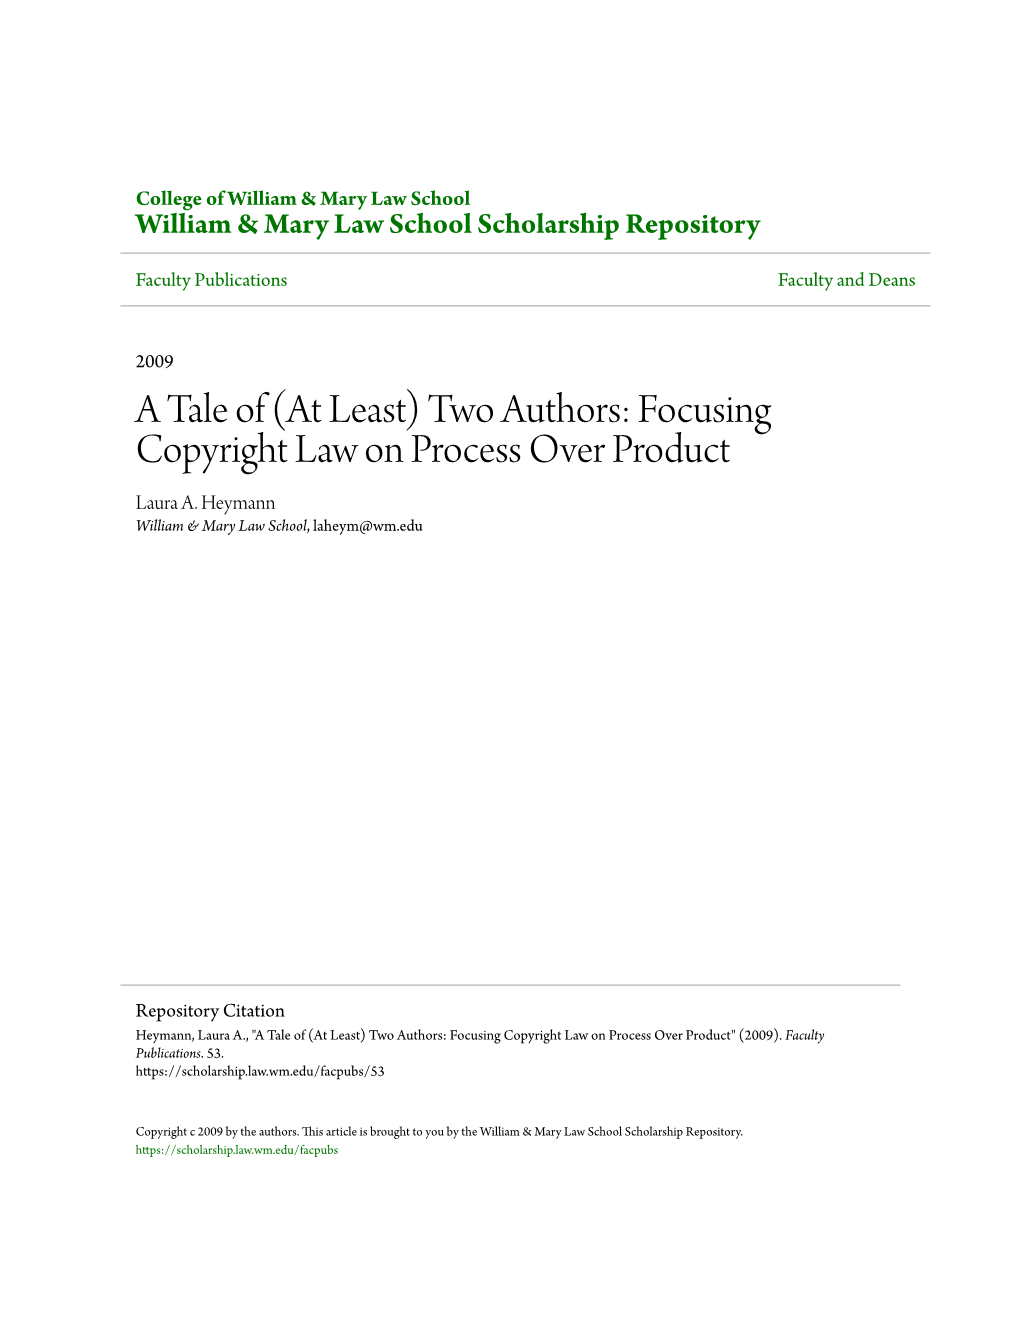 Two Authors: Focusing Copyright Law on Process Over Product Laura A